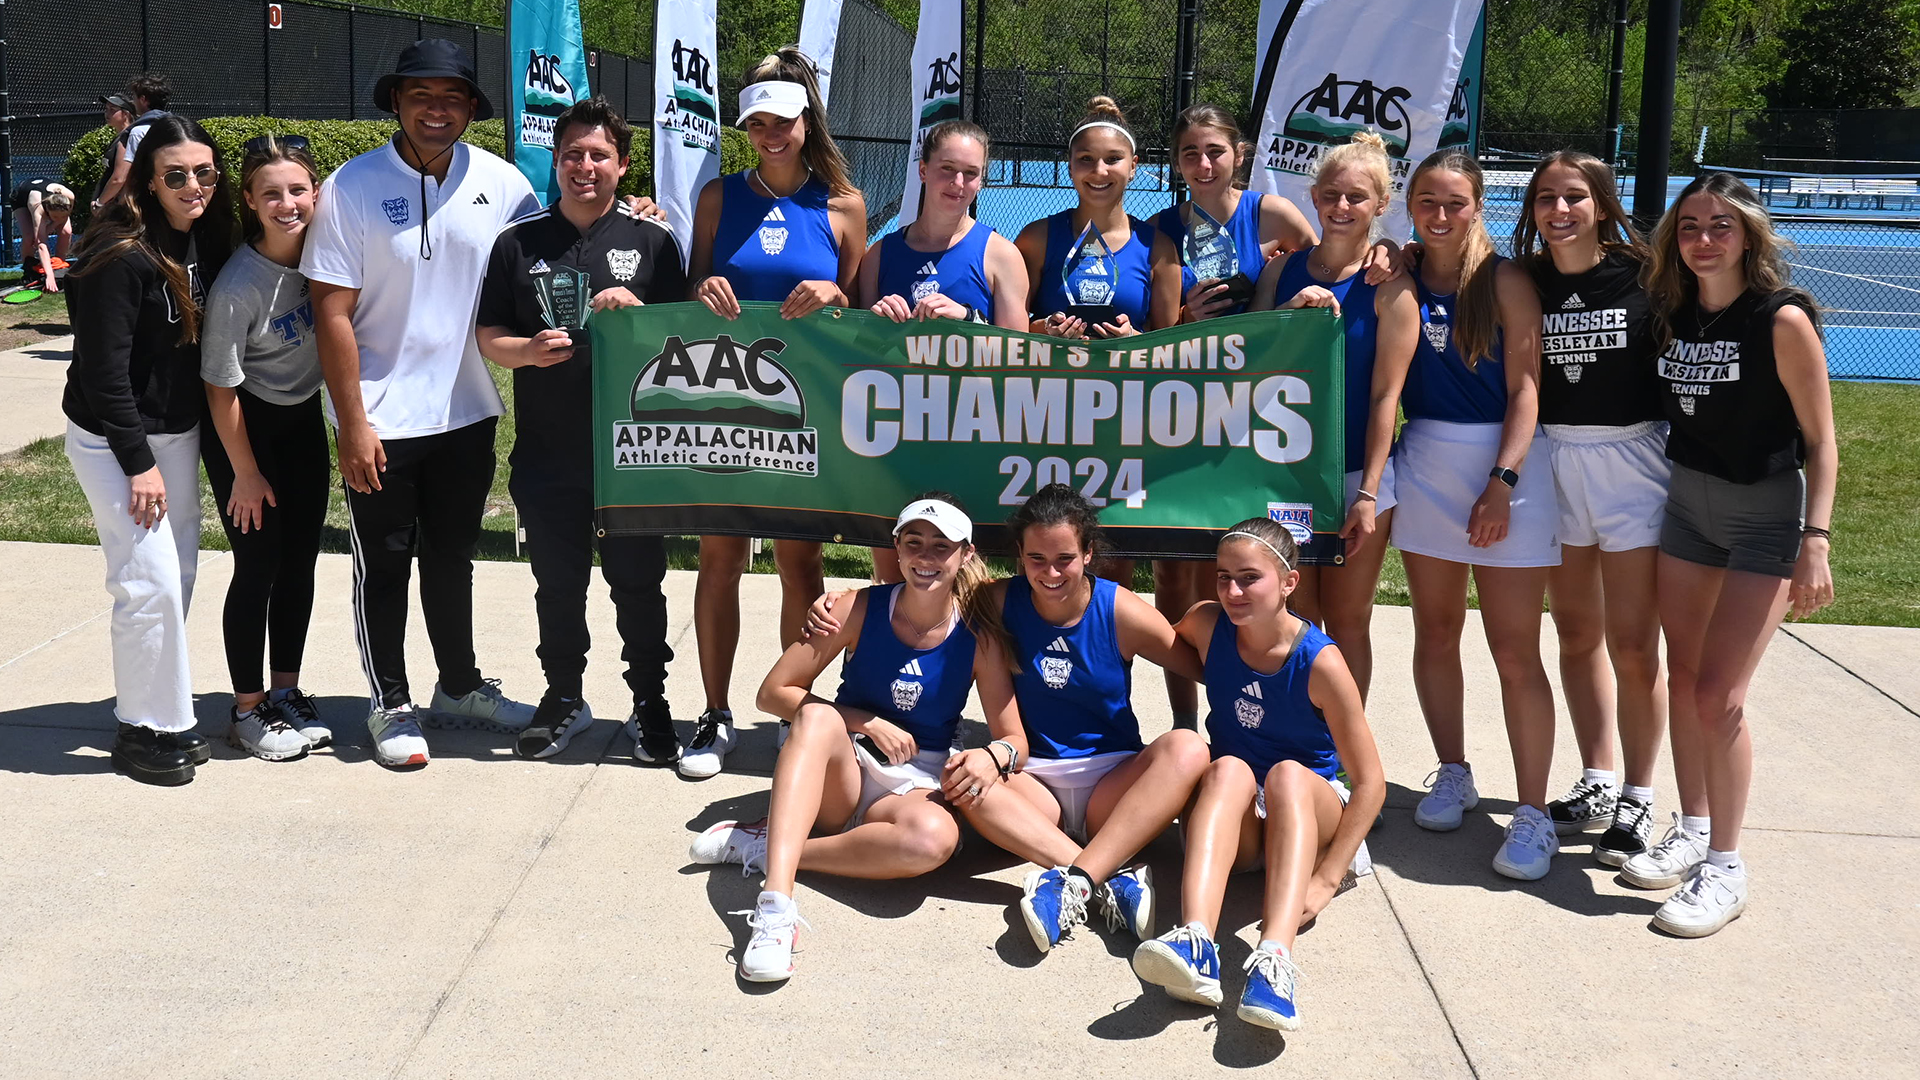 TWU Holds Off Union to Capture Women's Tennis Championship; All-AAC Team, Awards Announced